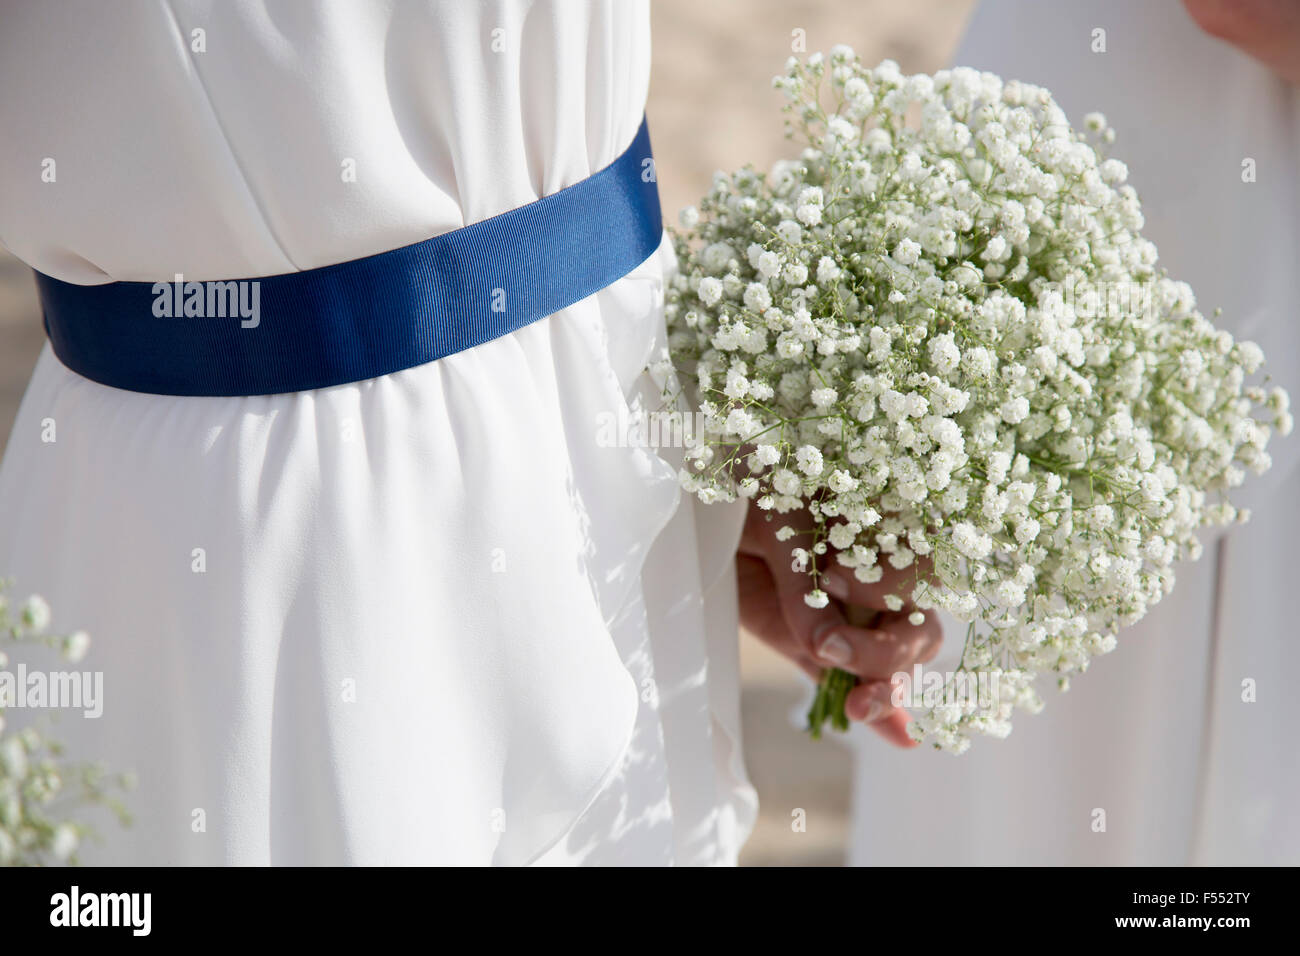 Midsection of bride holding flowers outdoors Stock Photo